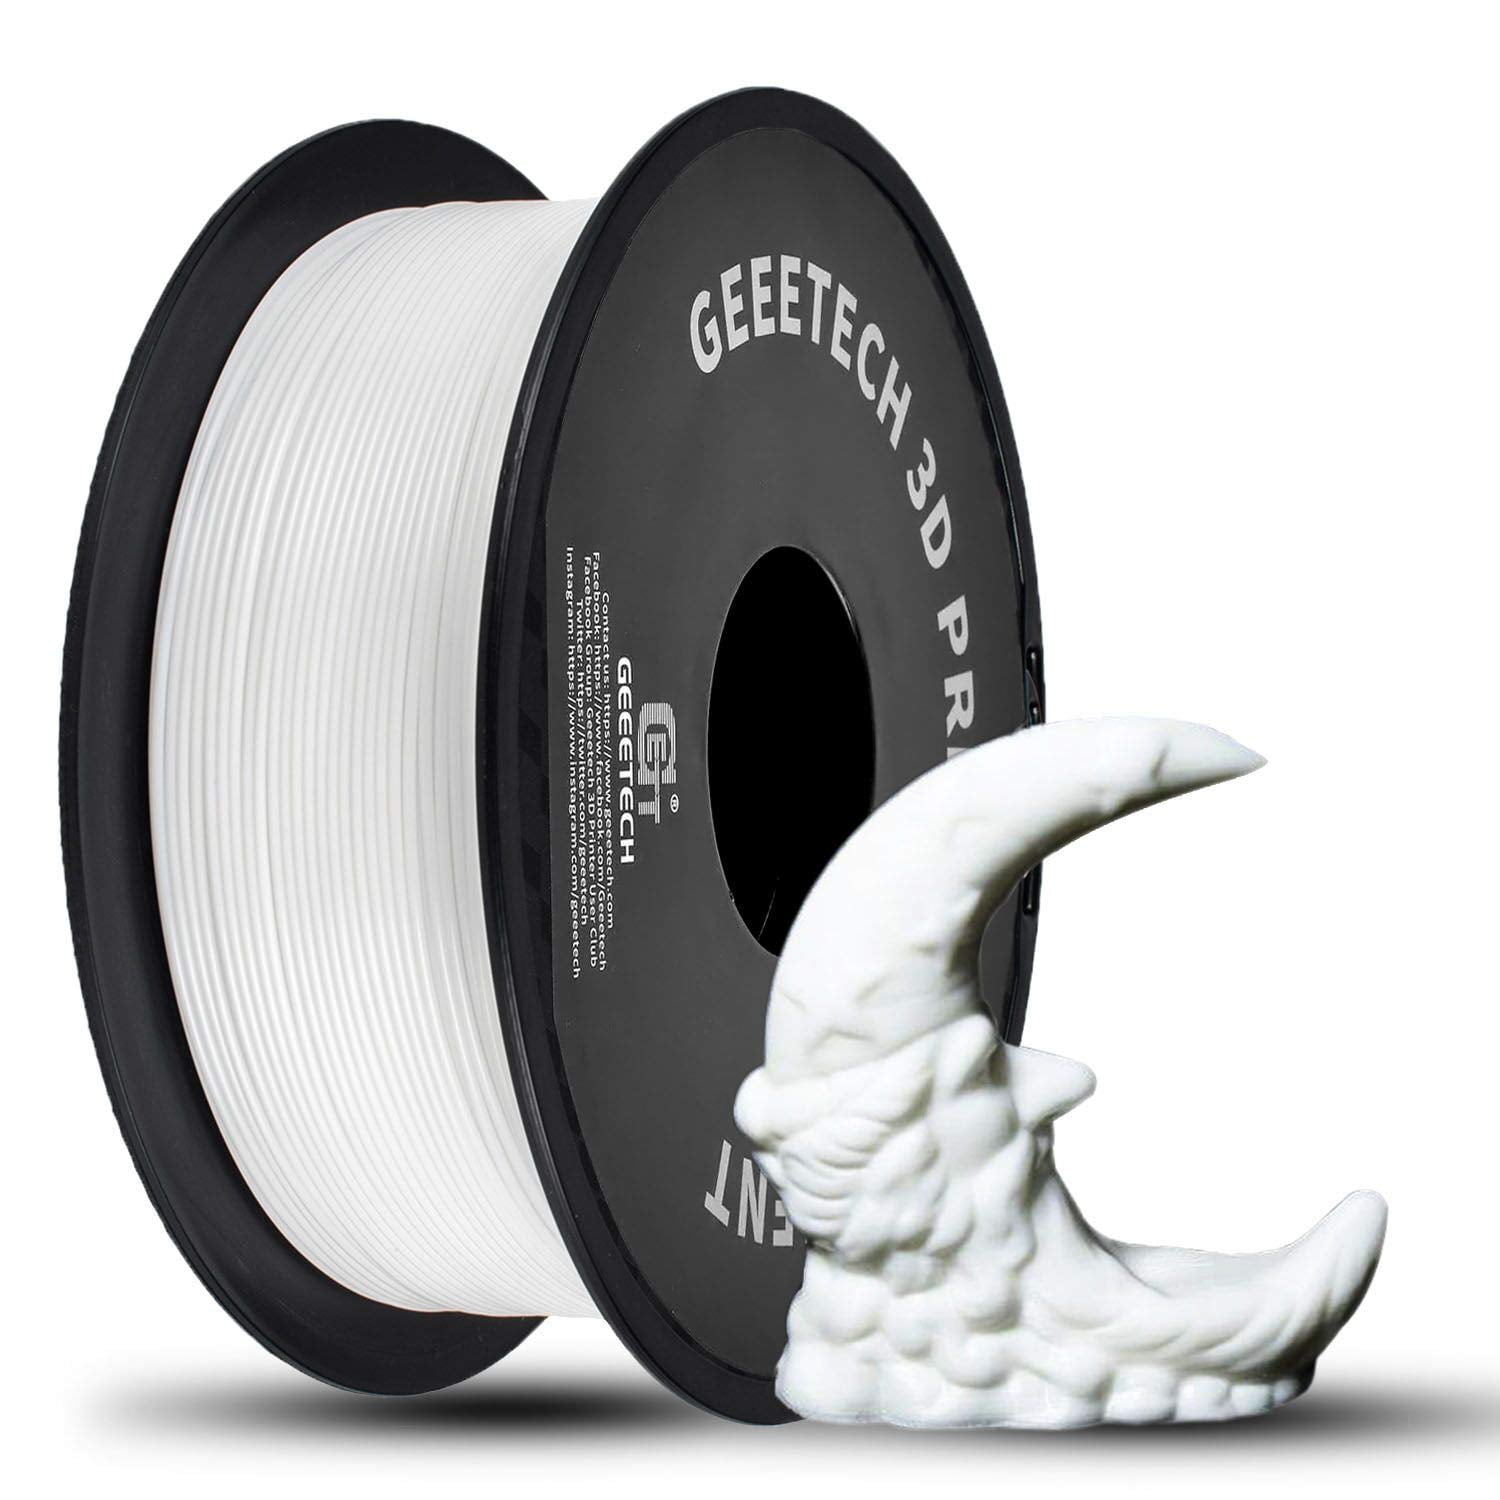 UK Seller Geeetech 2× PLA Filament 1.75mm Black and White Color Free Shipping 